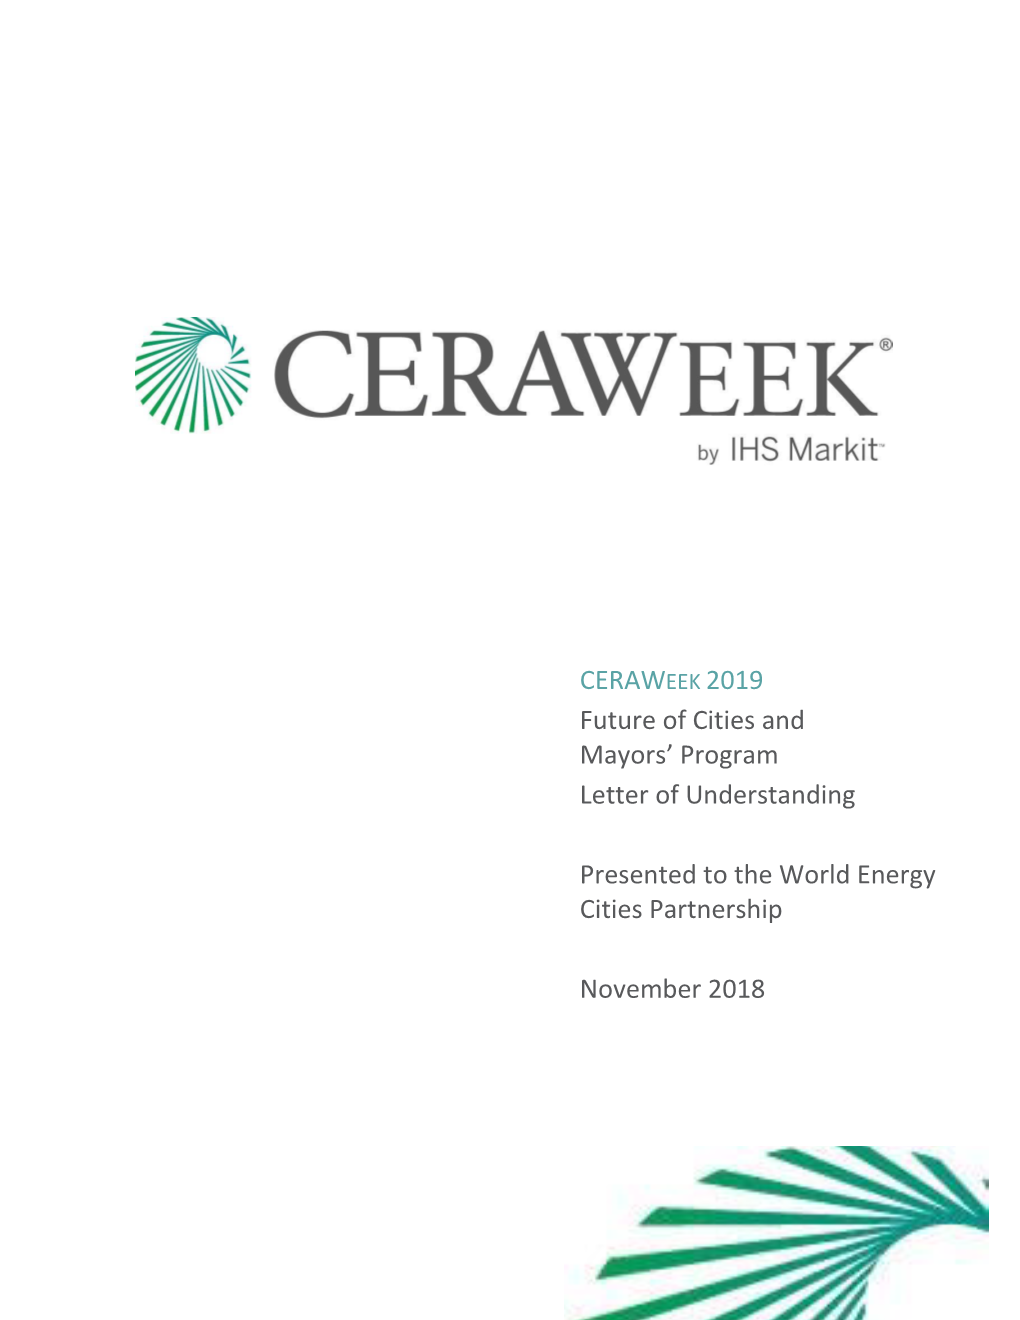 CERAWEEK 2019 Future of Cities and Mayors' Program Letter of Understanding Presented to the World Energy Cities Partnership N